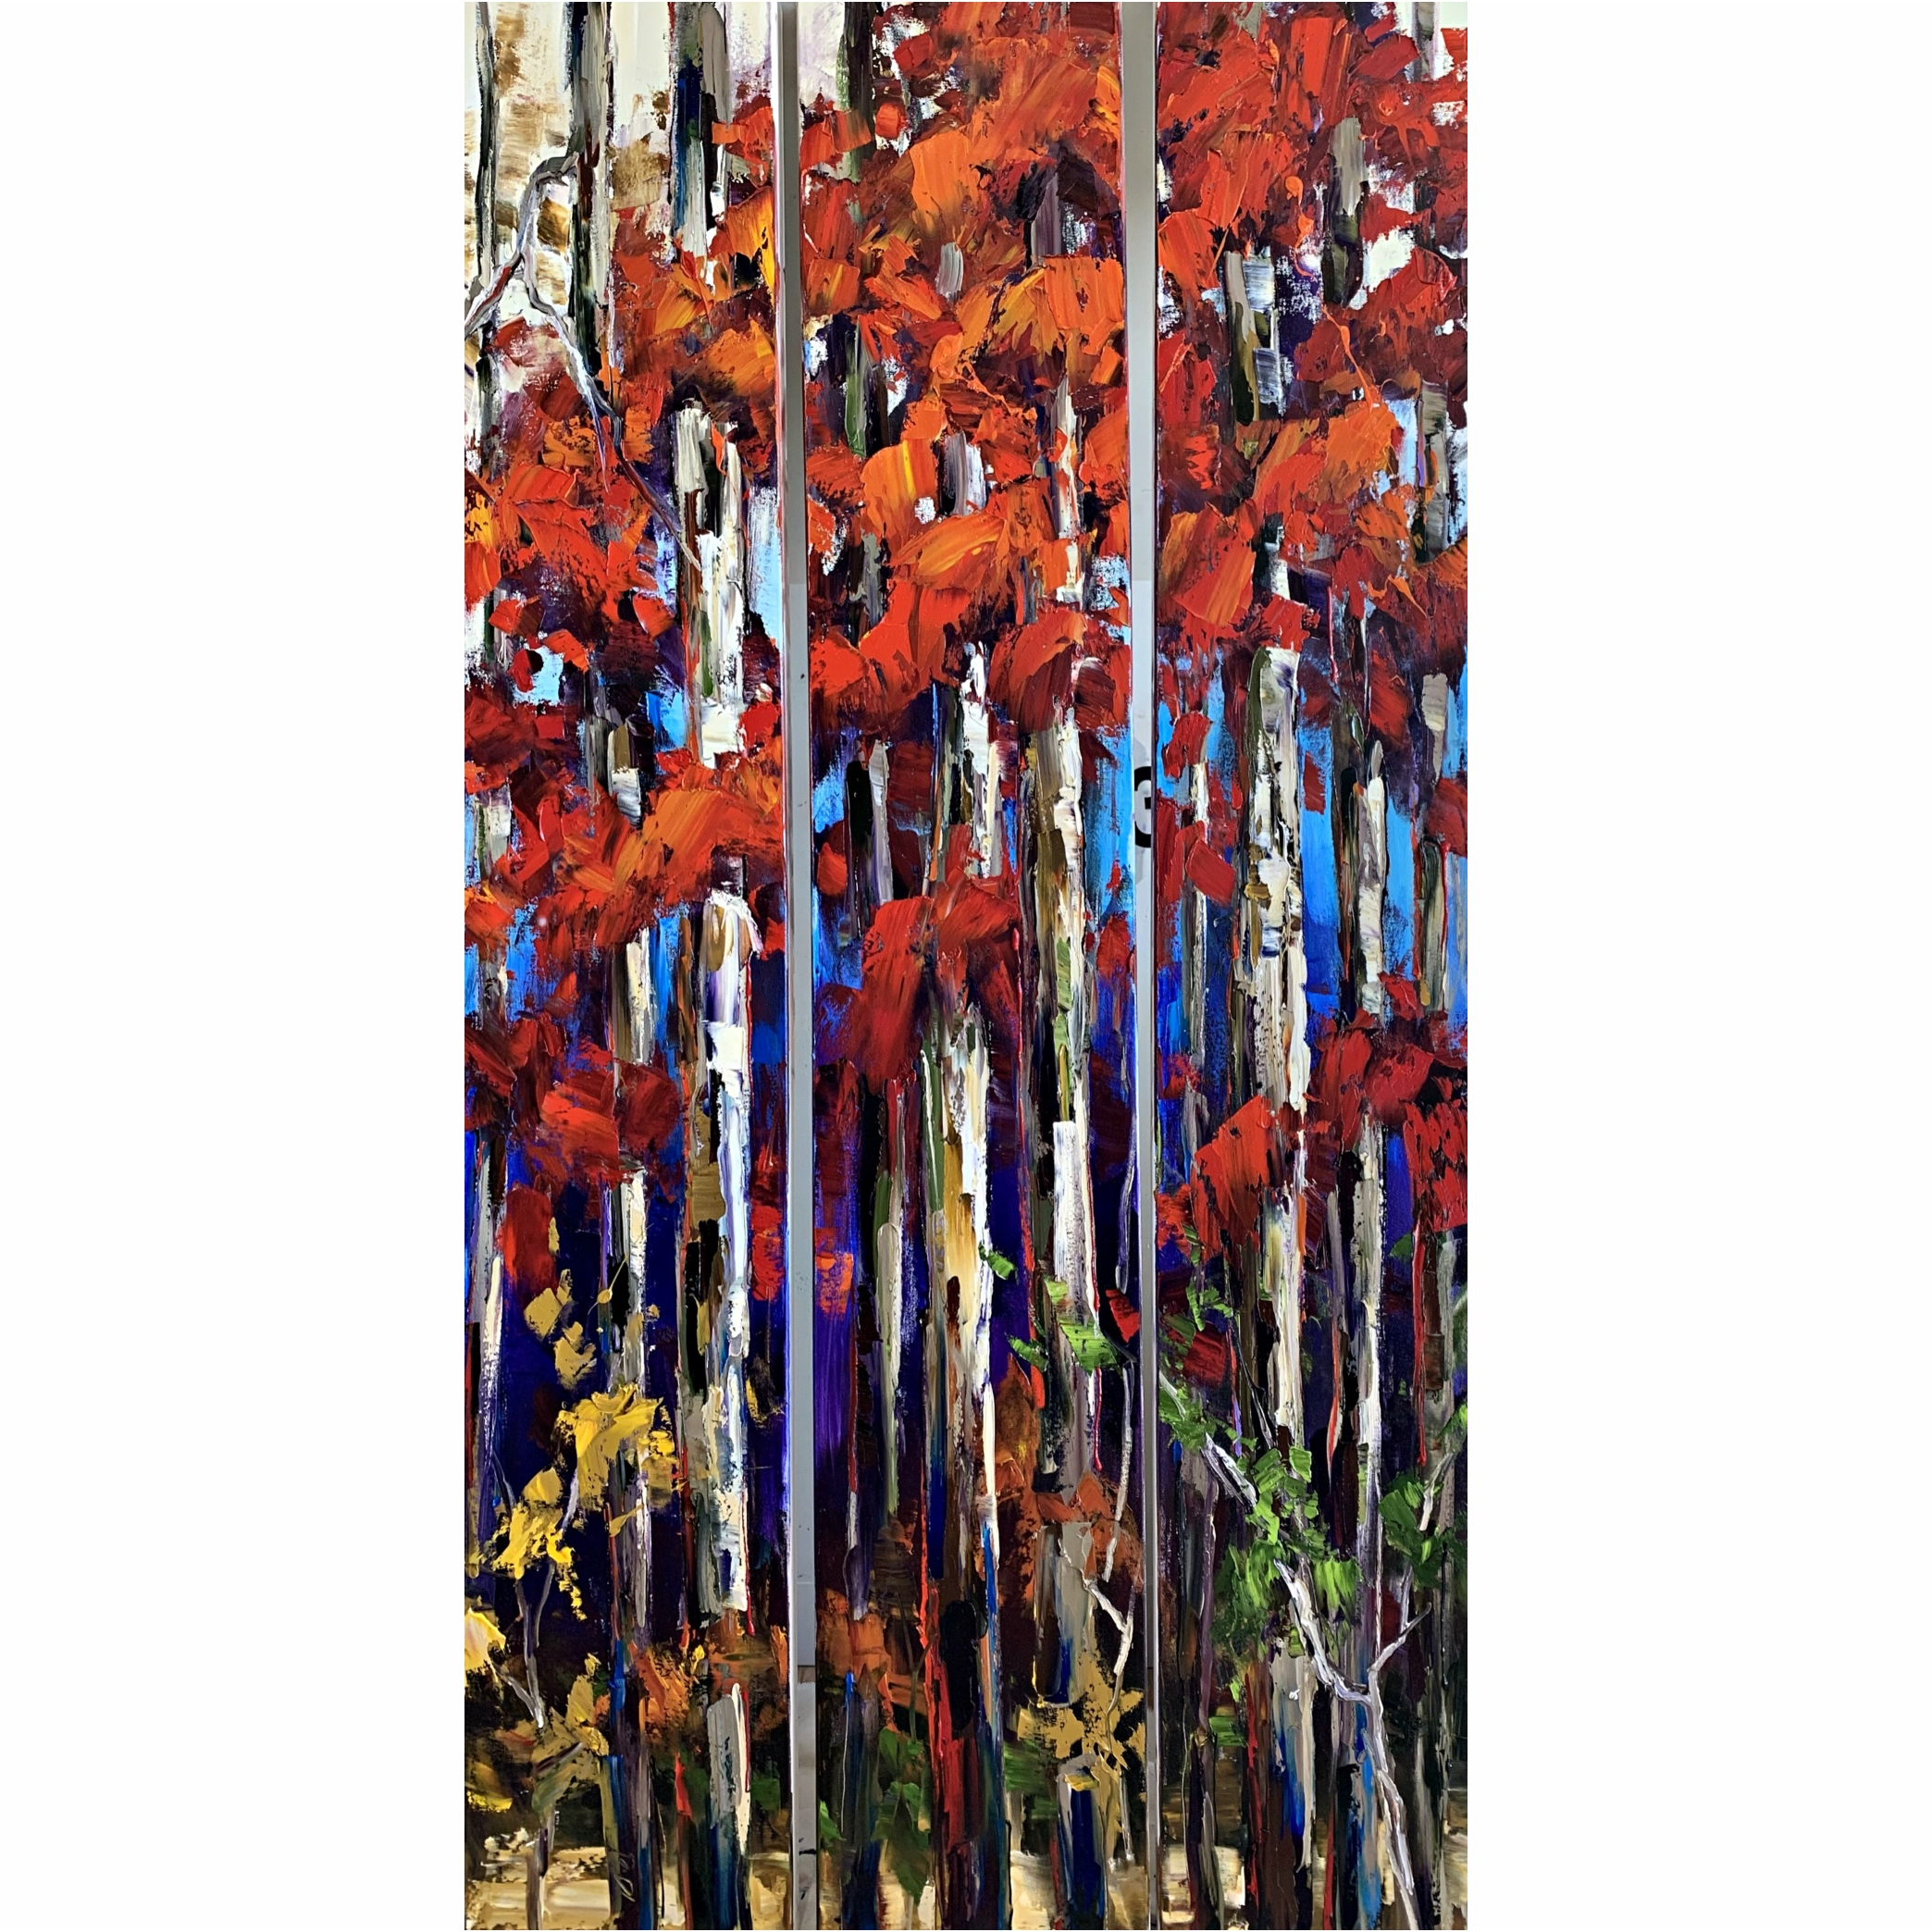 In the Morning Sun, oil tree painting by Kimberly Kiel | Effusion Art Gallery + Cast Glass Studio, Invermere BC